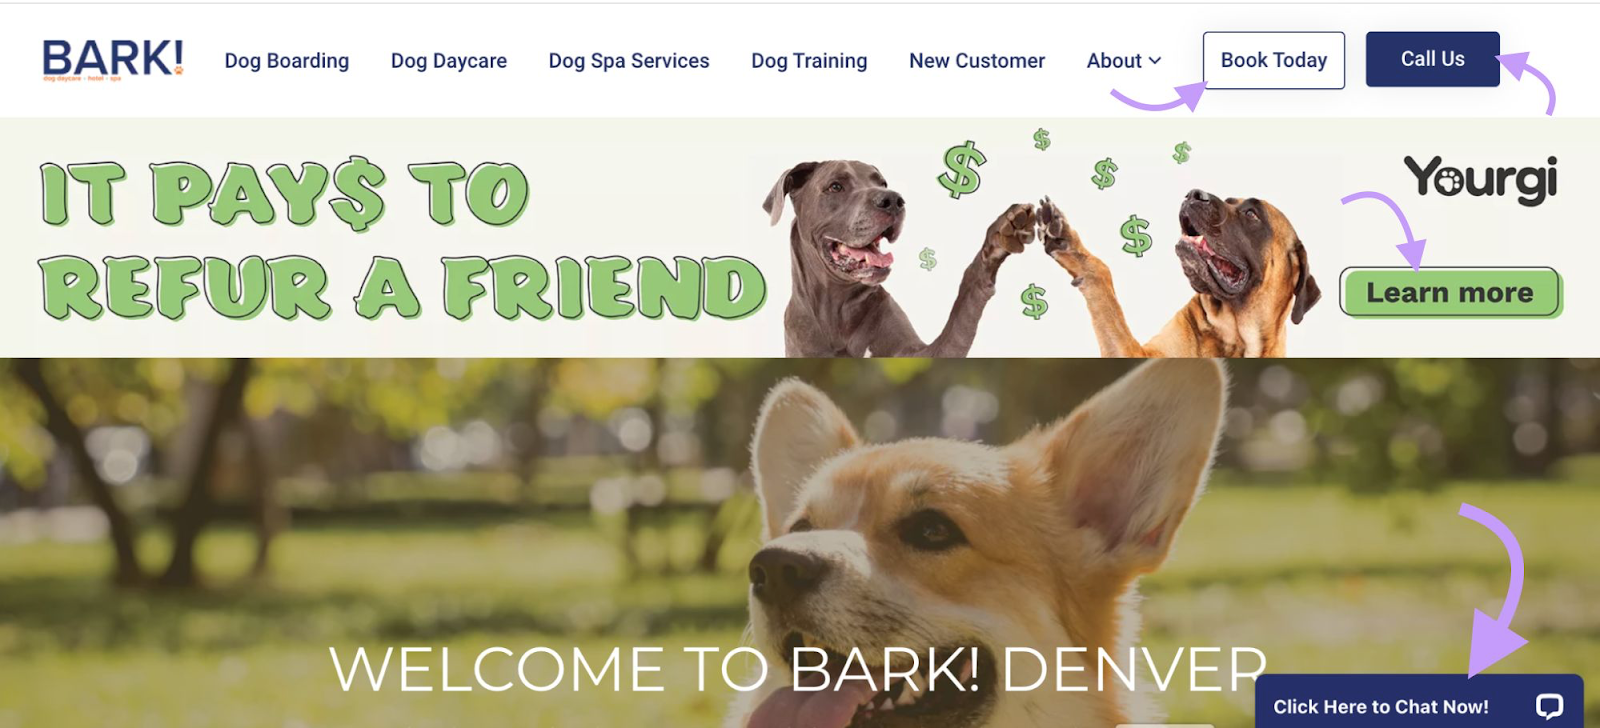 BARK! homepage with "Book Today" "Call Us" and "Learn more" CTAs highlighted